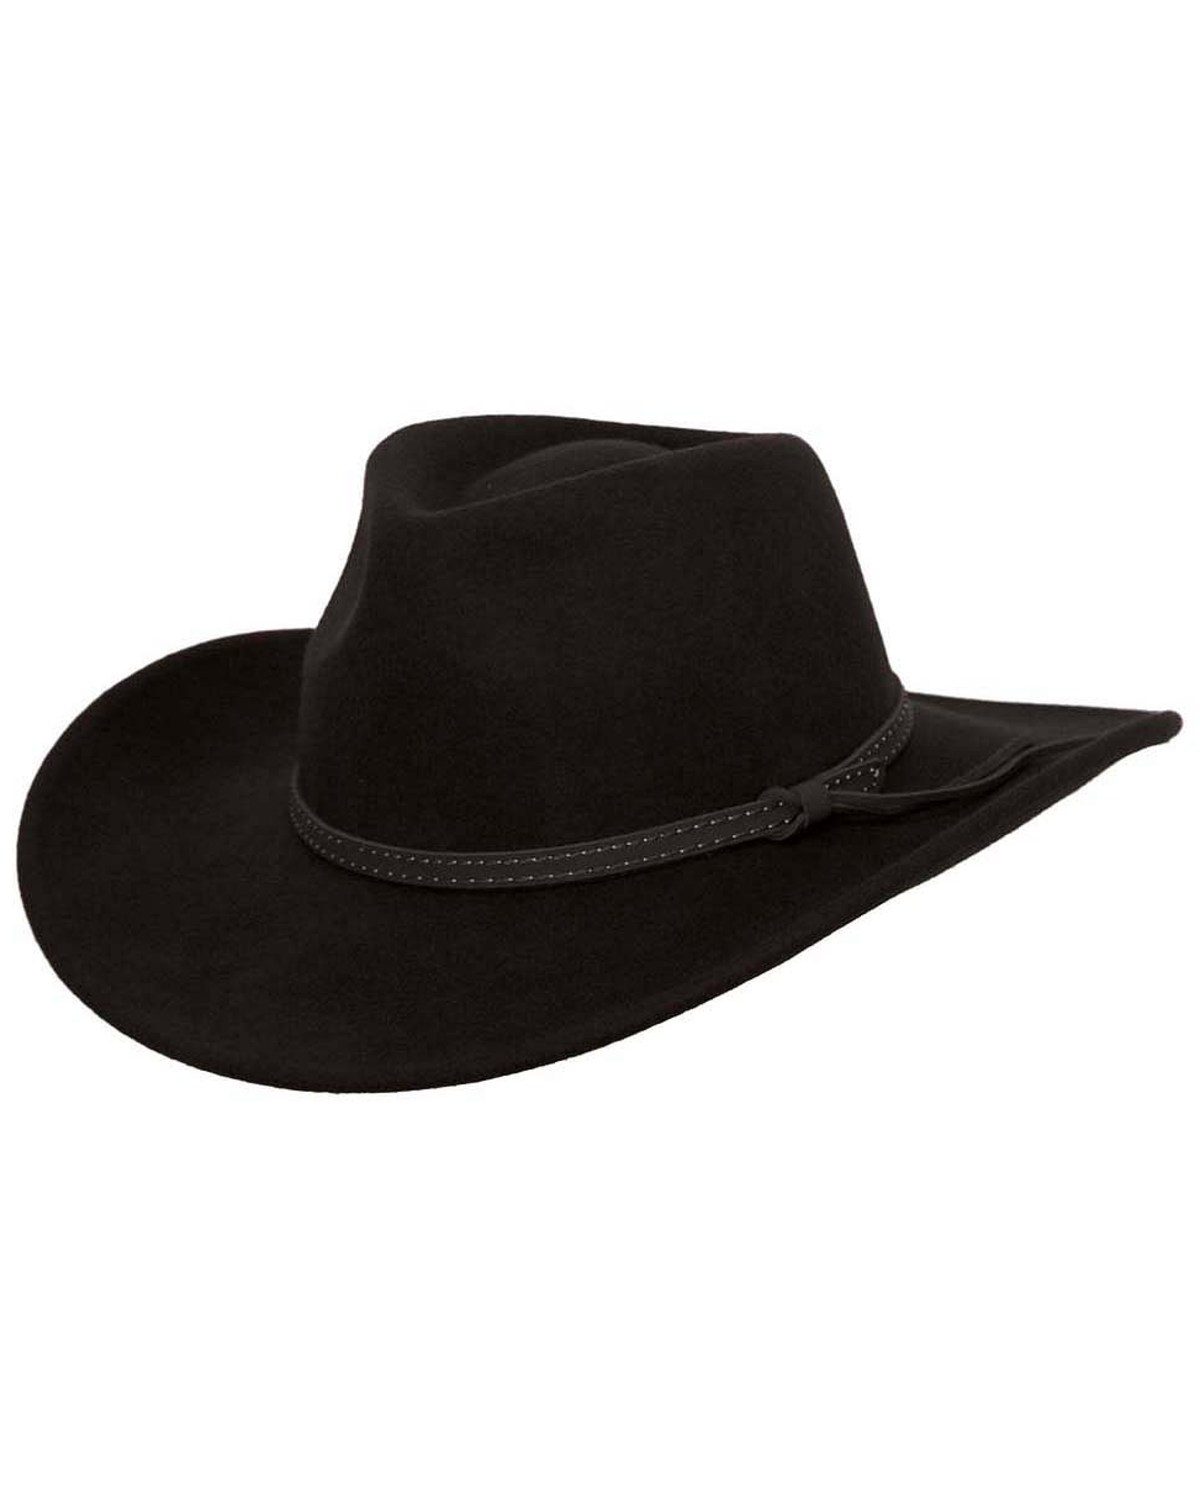 Outback Trading Co. Cooper River Crushable Australian Wool Hat